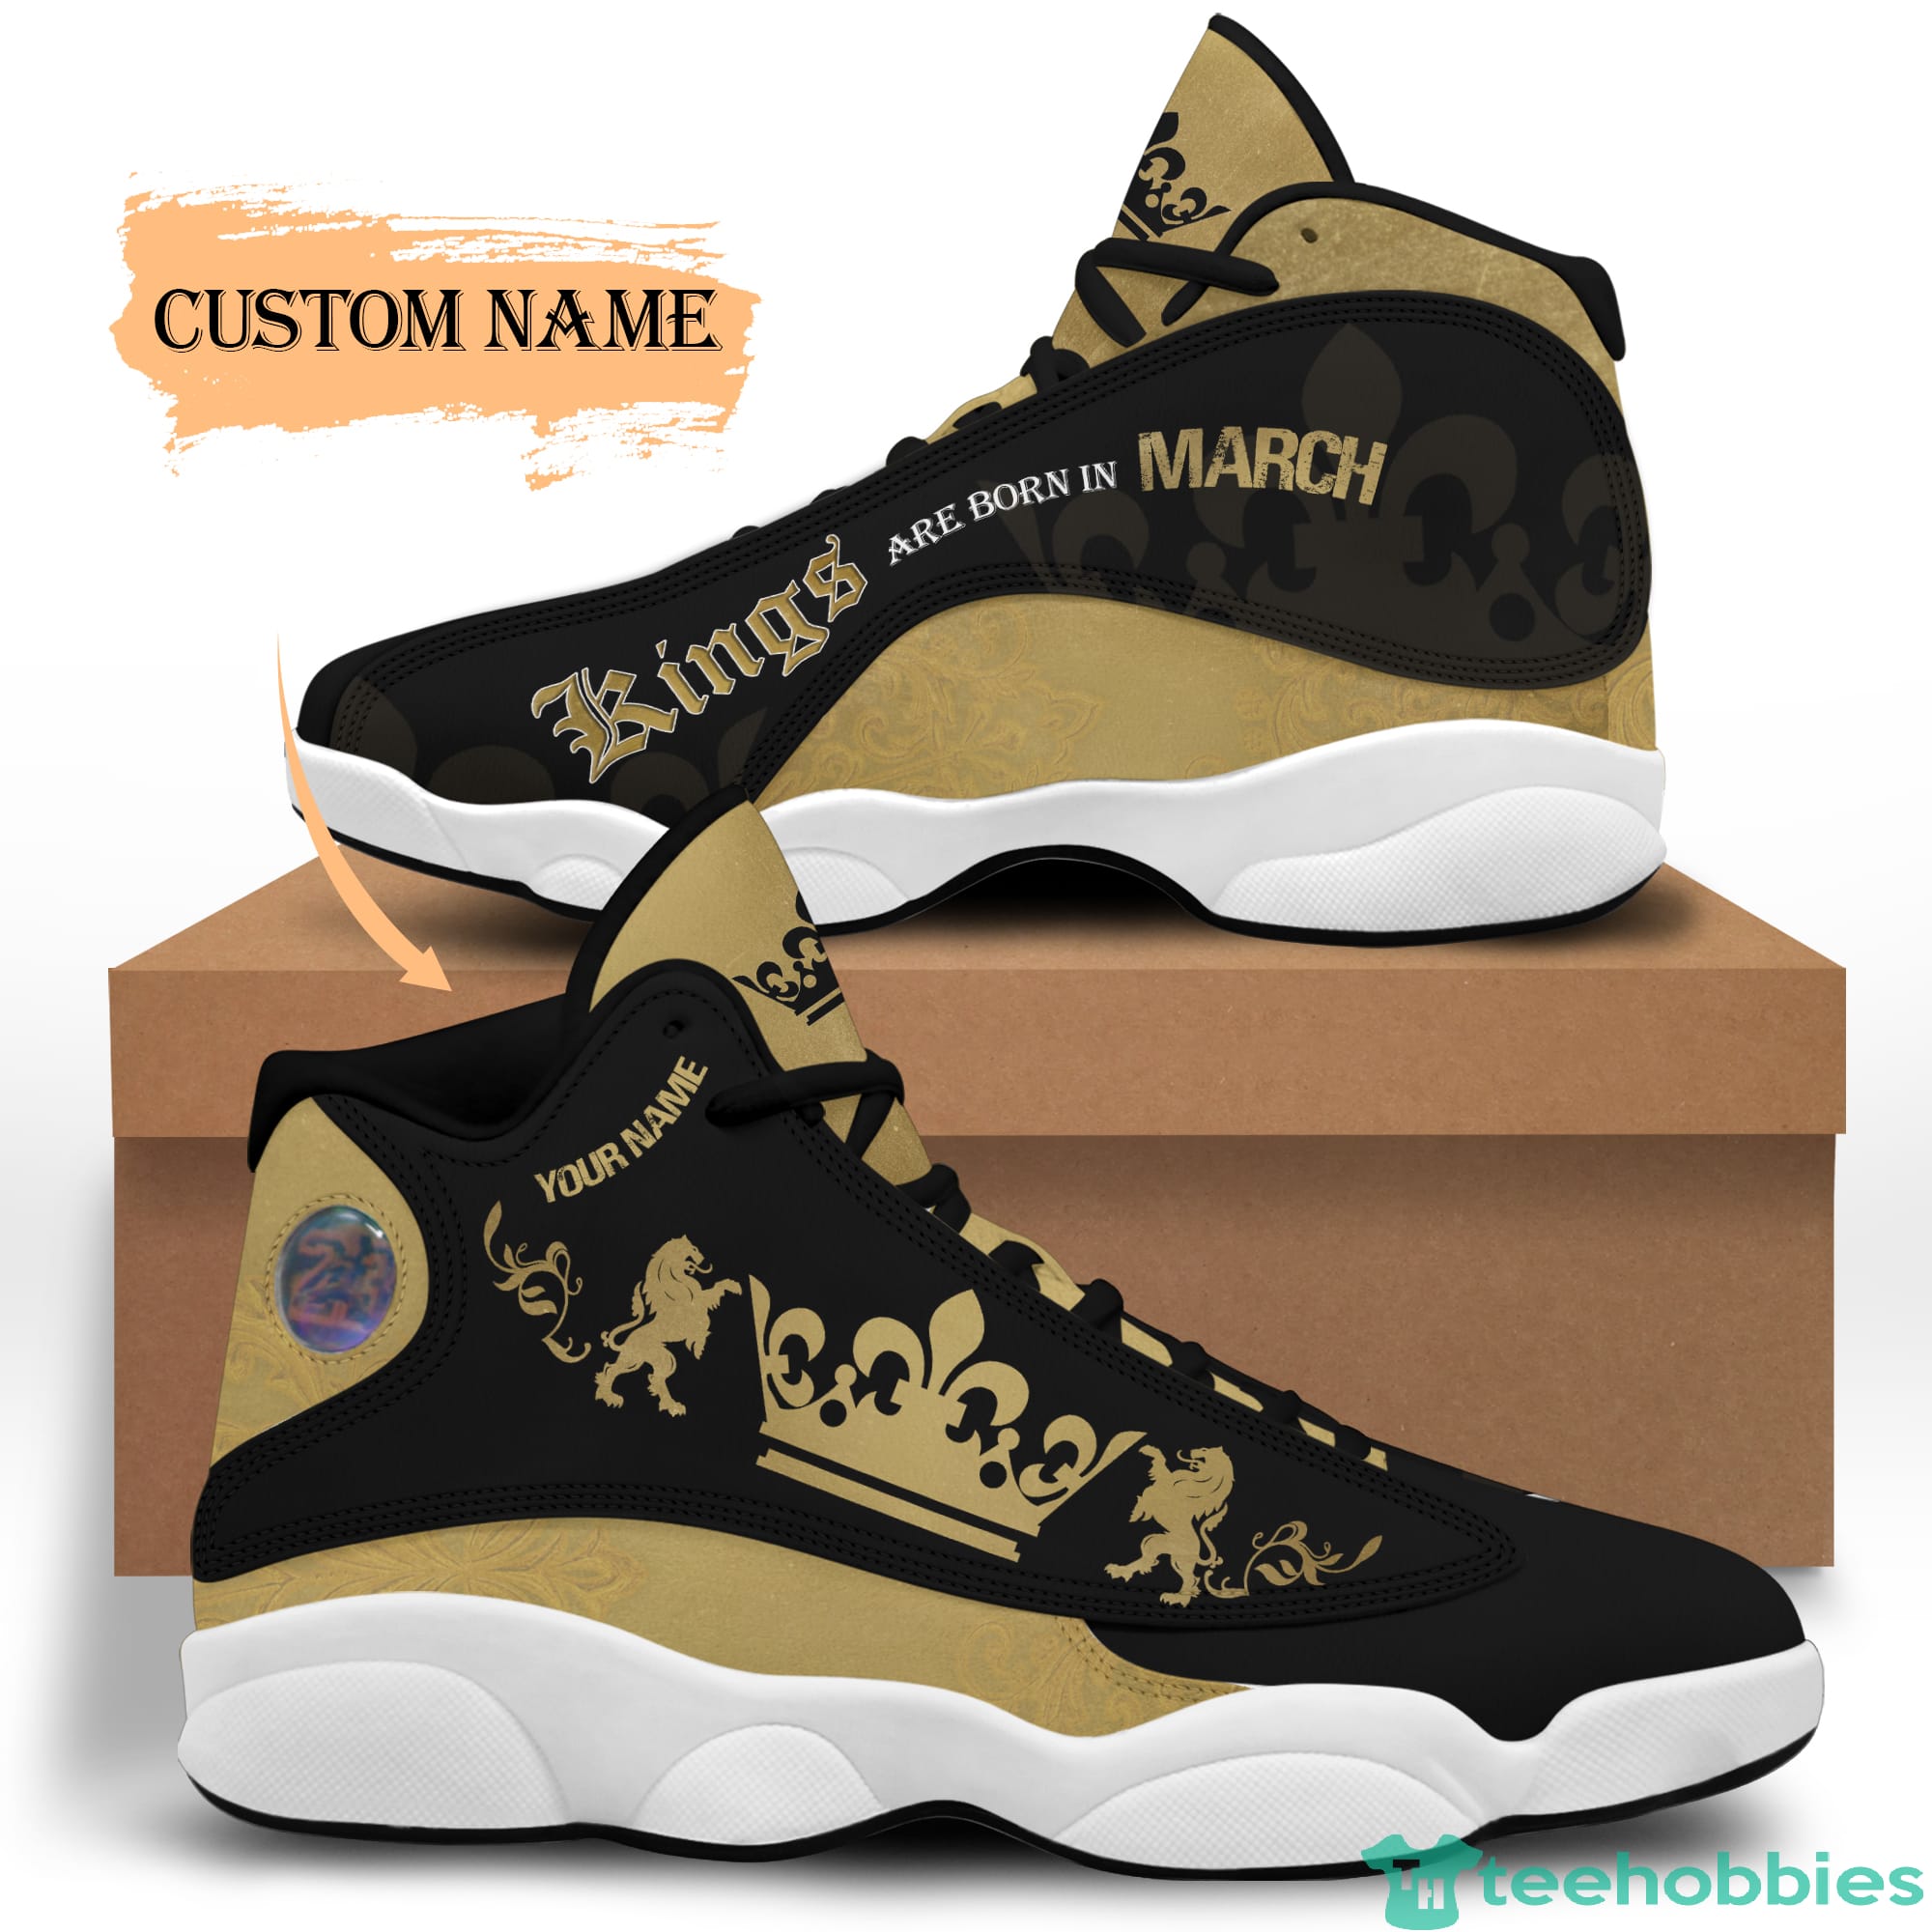 March King Birthday Gift Personalized Name Air Jordan 13 Shoes 71